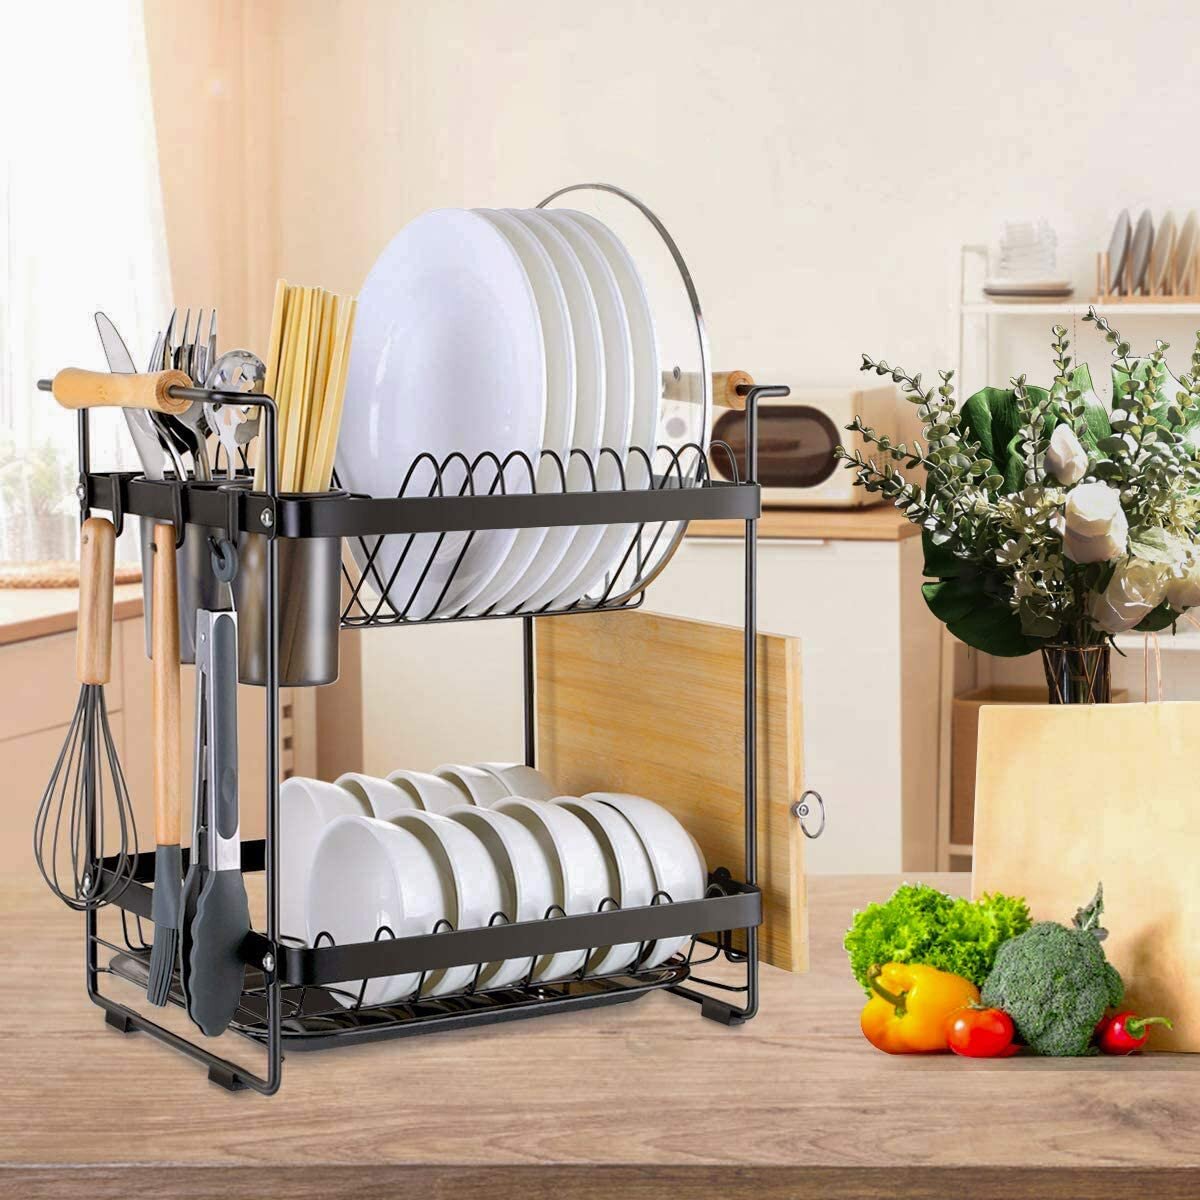 3-Tier Dish Drying Rack Stainless Steel Drainer Kitchen Storage Space Saver Home